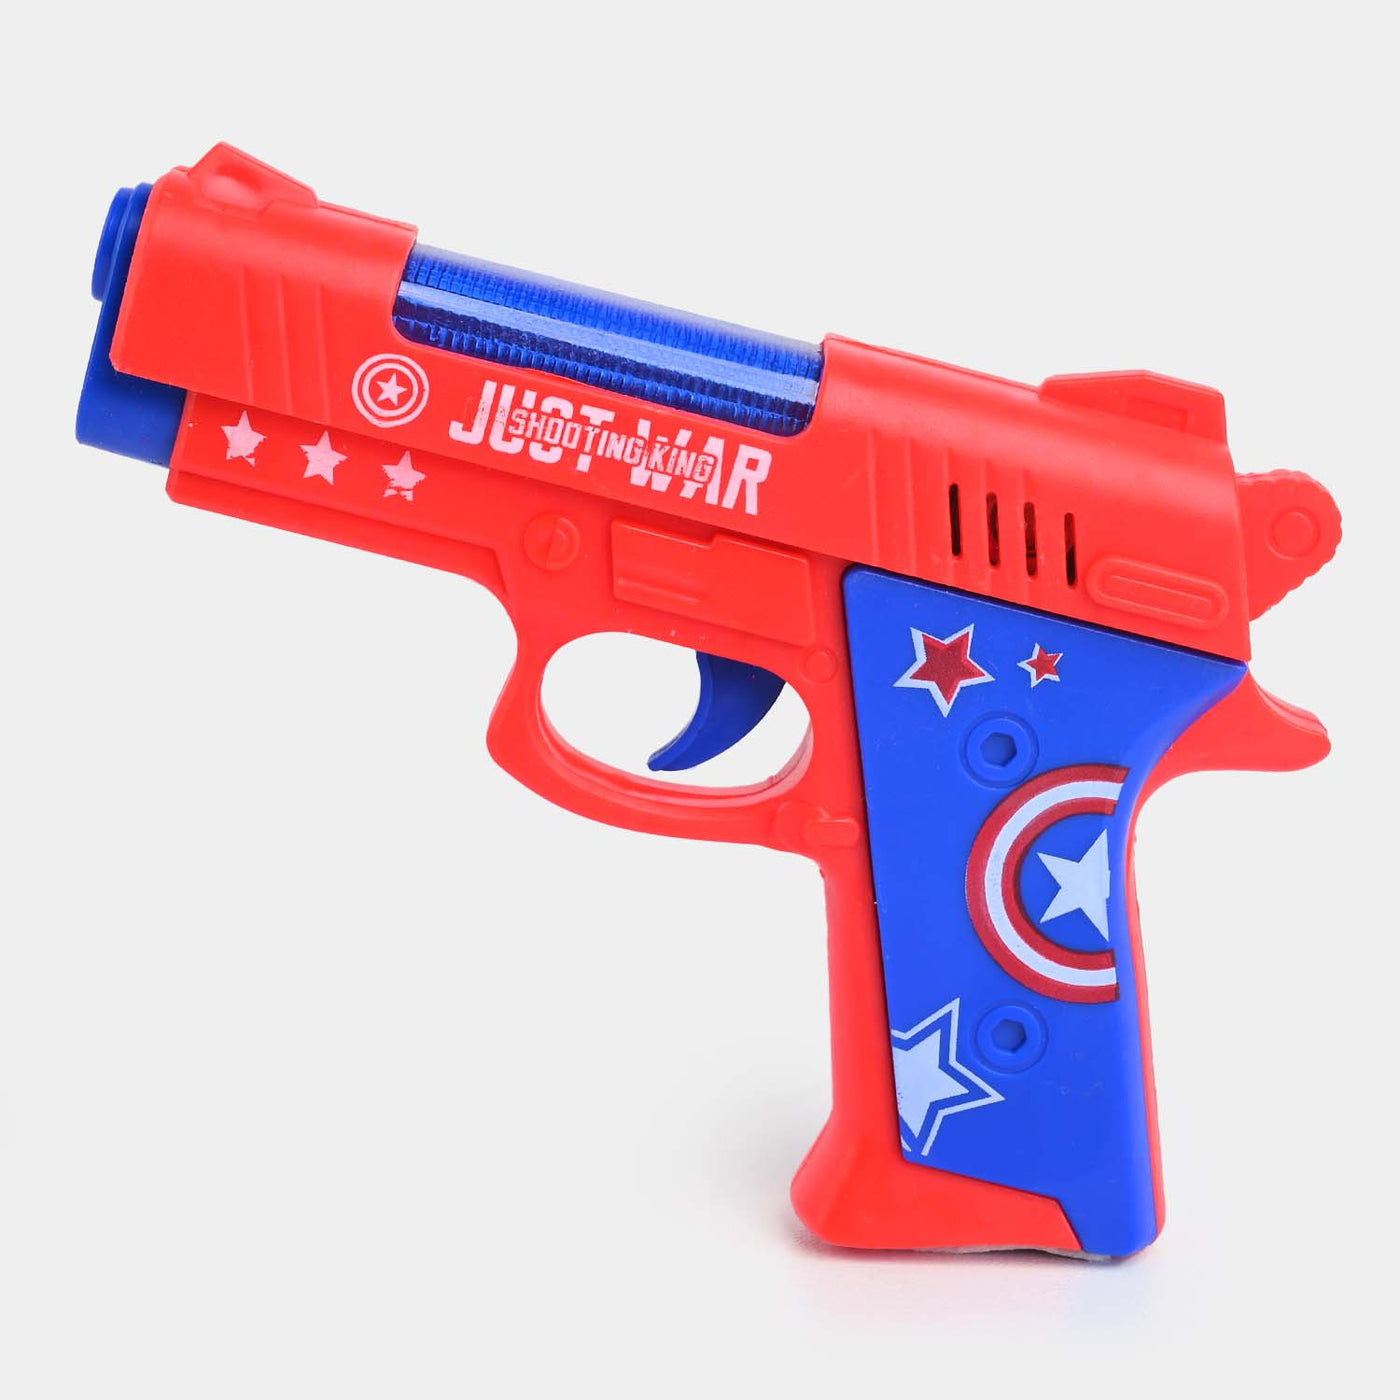 Mini Pistol Colorful Toy with Flashing Light and Music